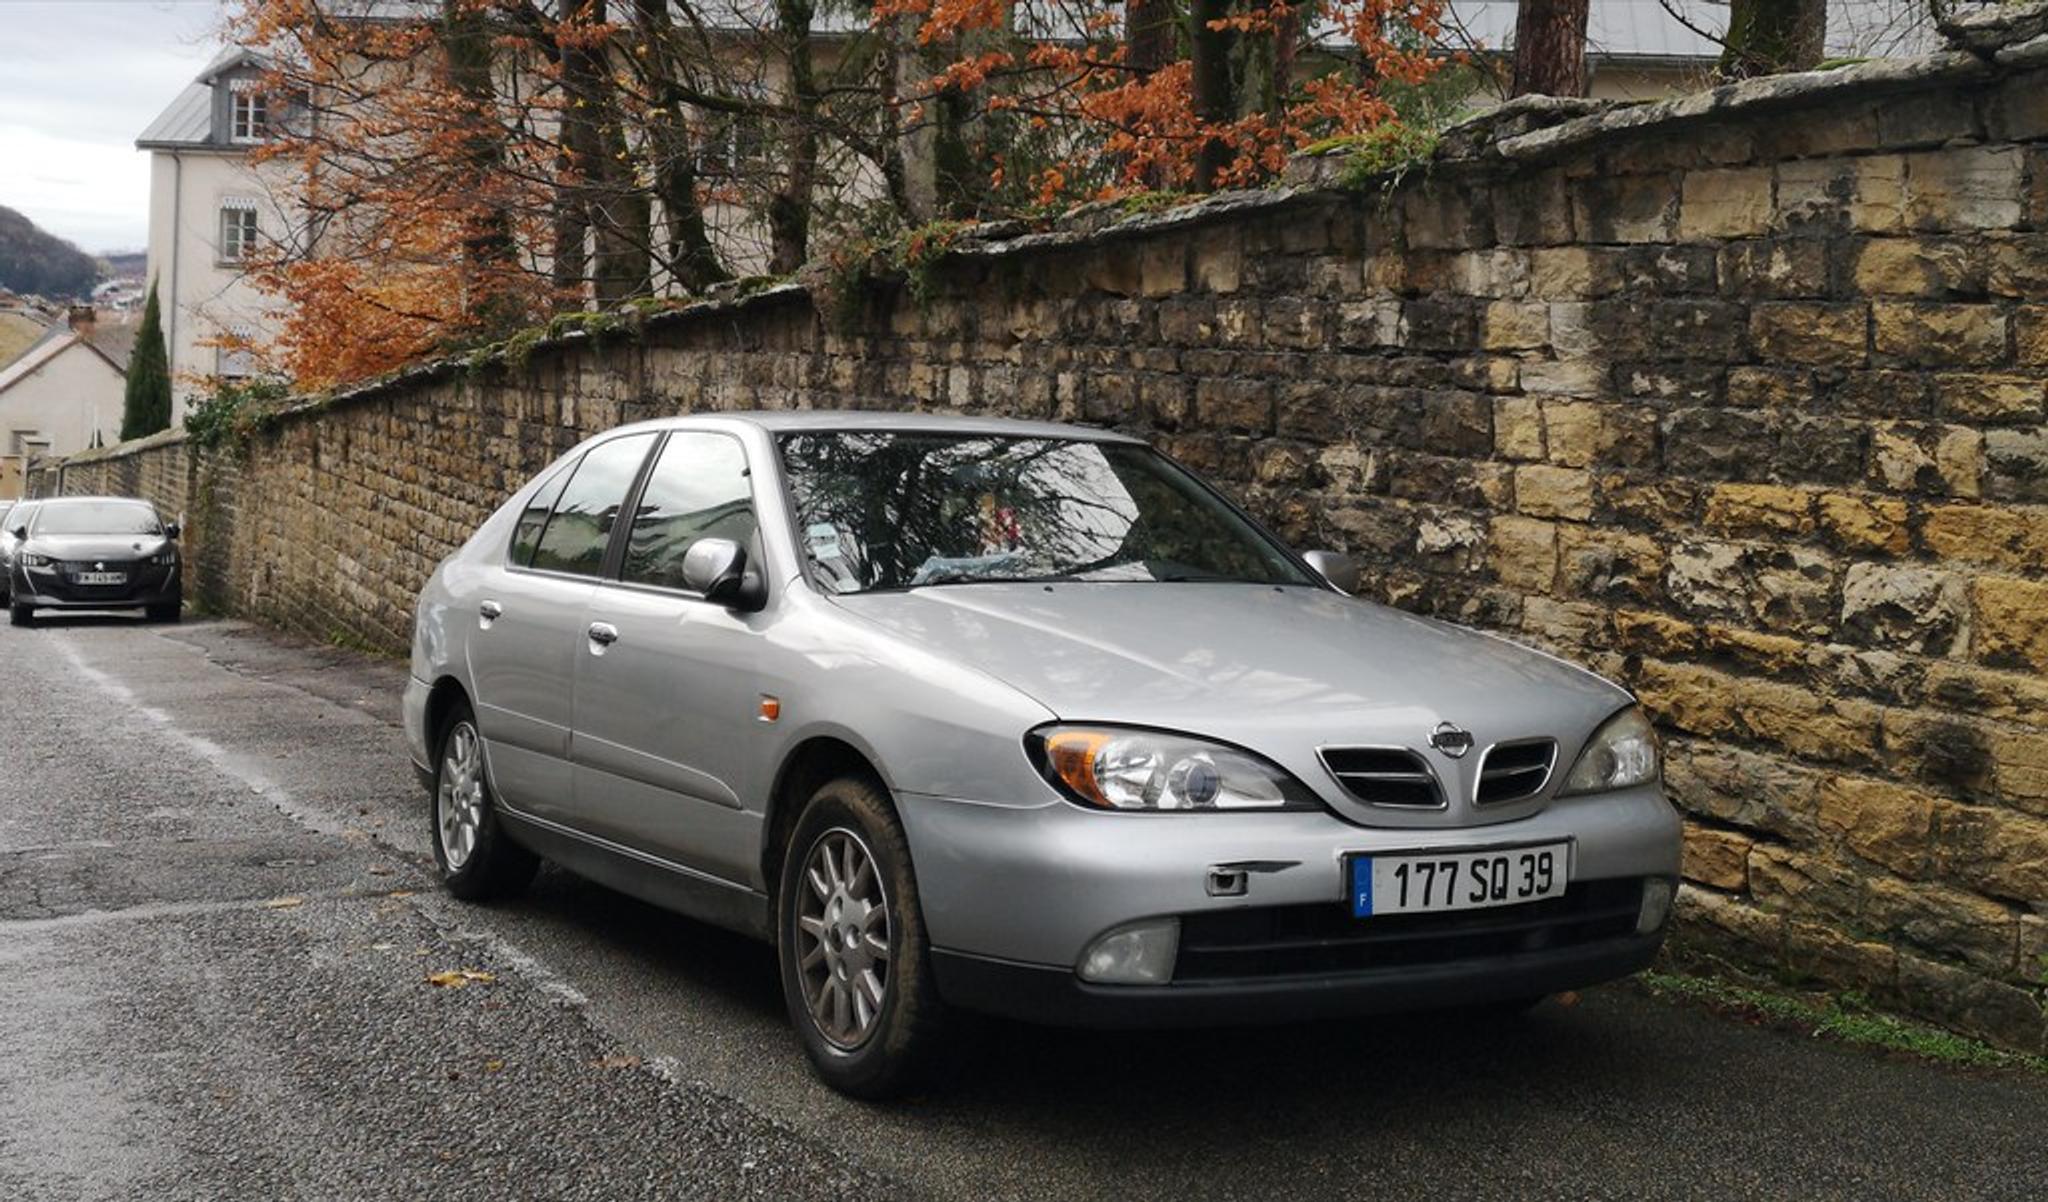 Silver Nissan Primera parked by the wall